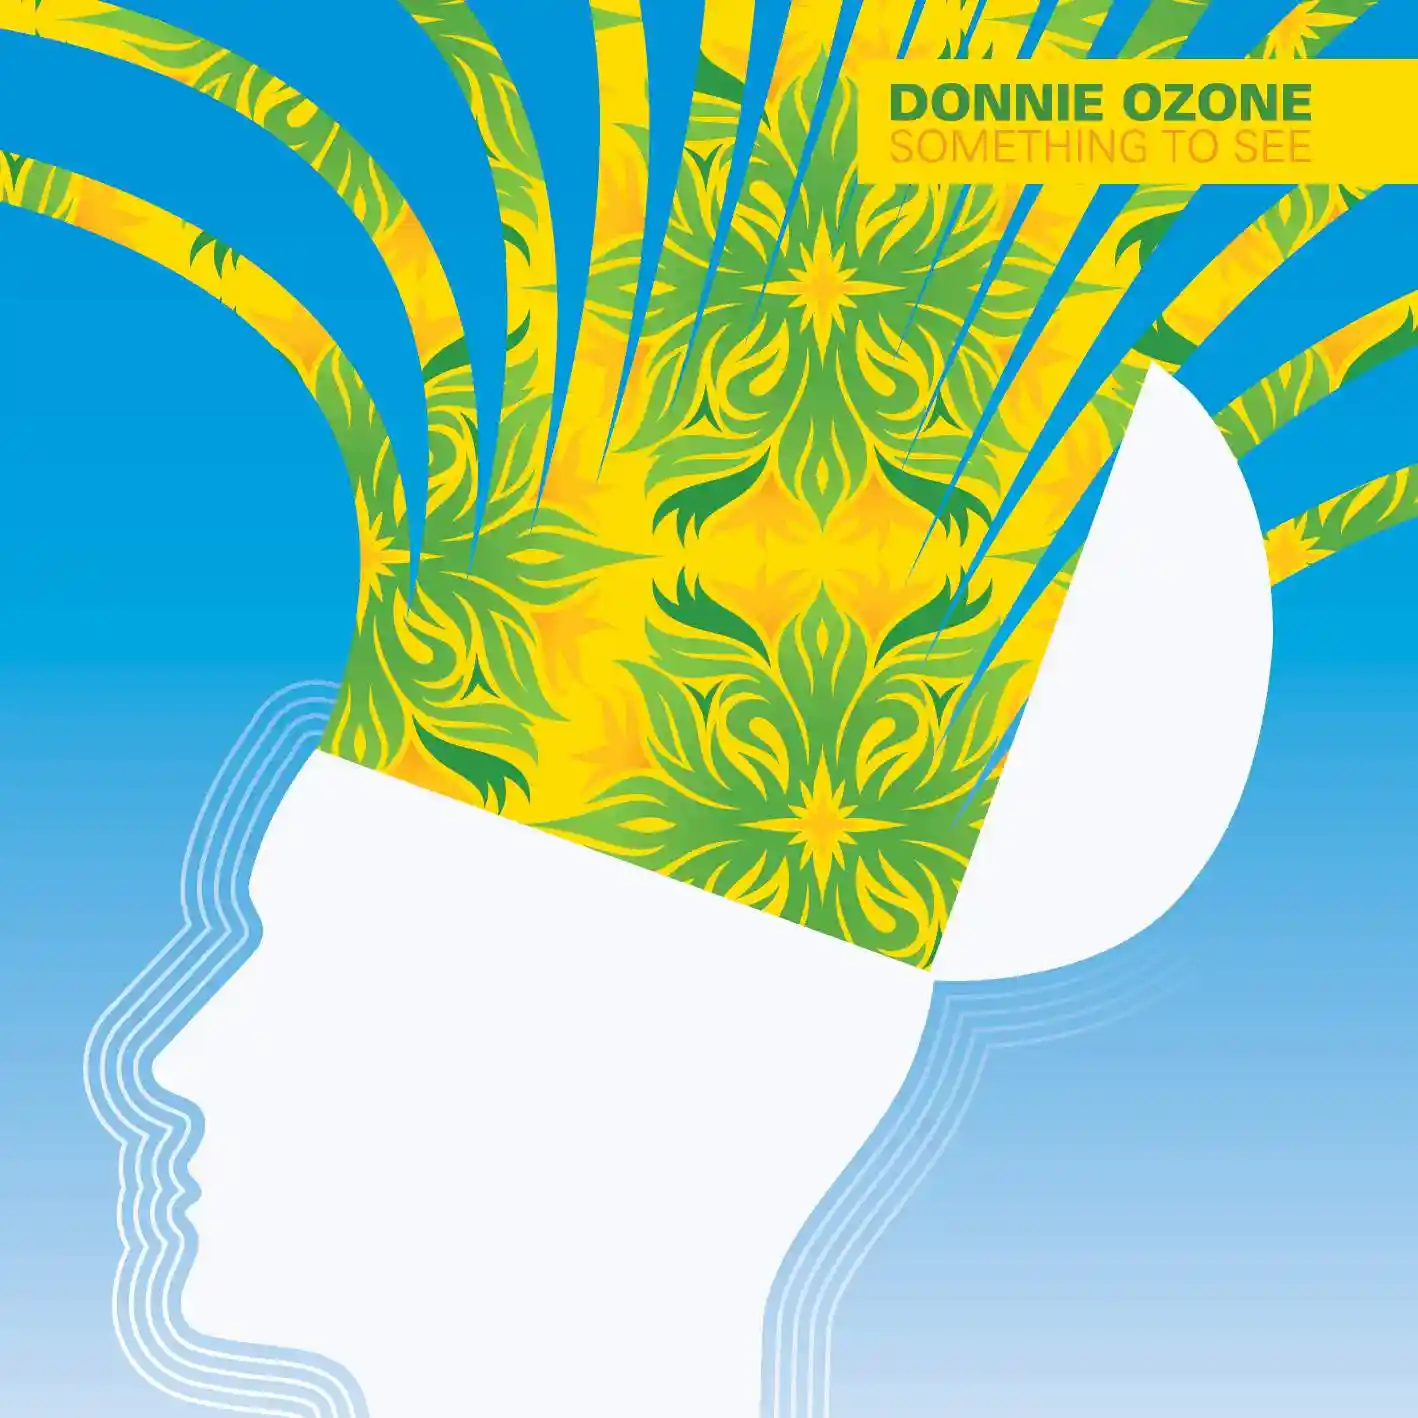 Album cover for “Something To See” by Donnie Ozone